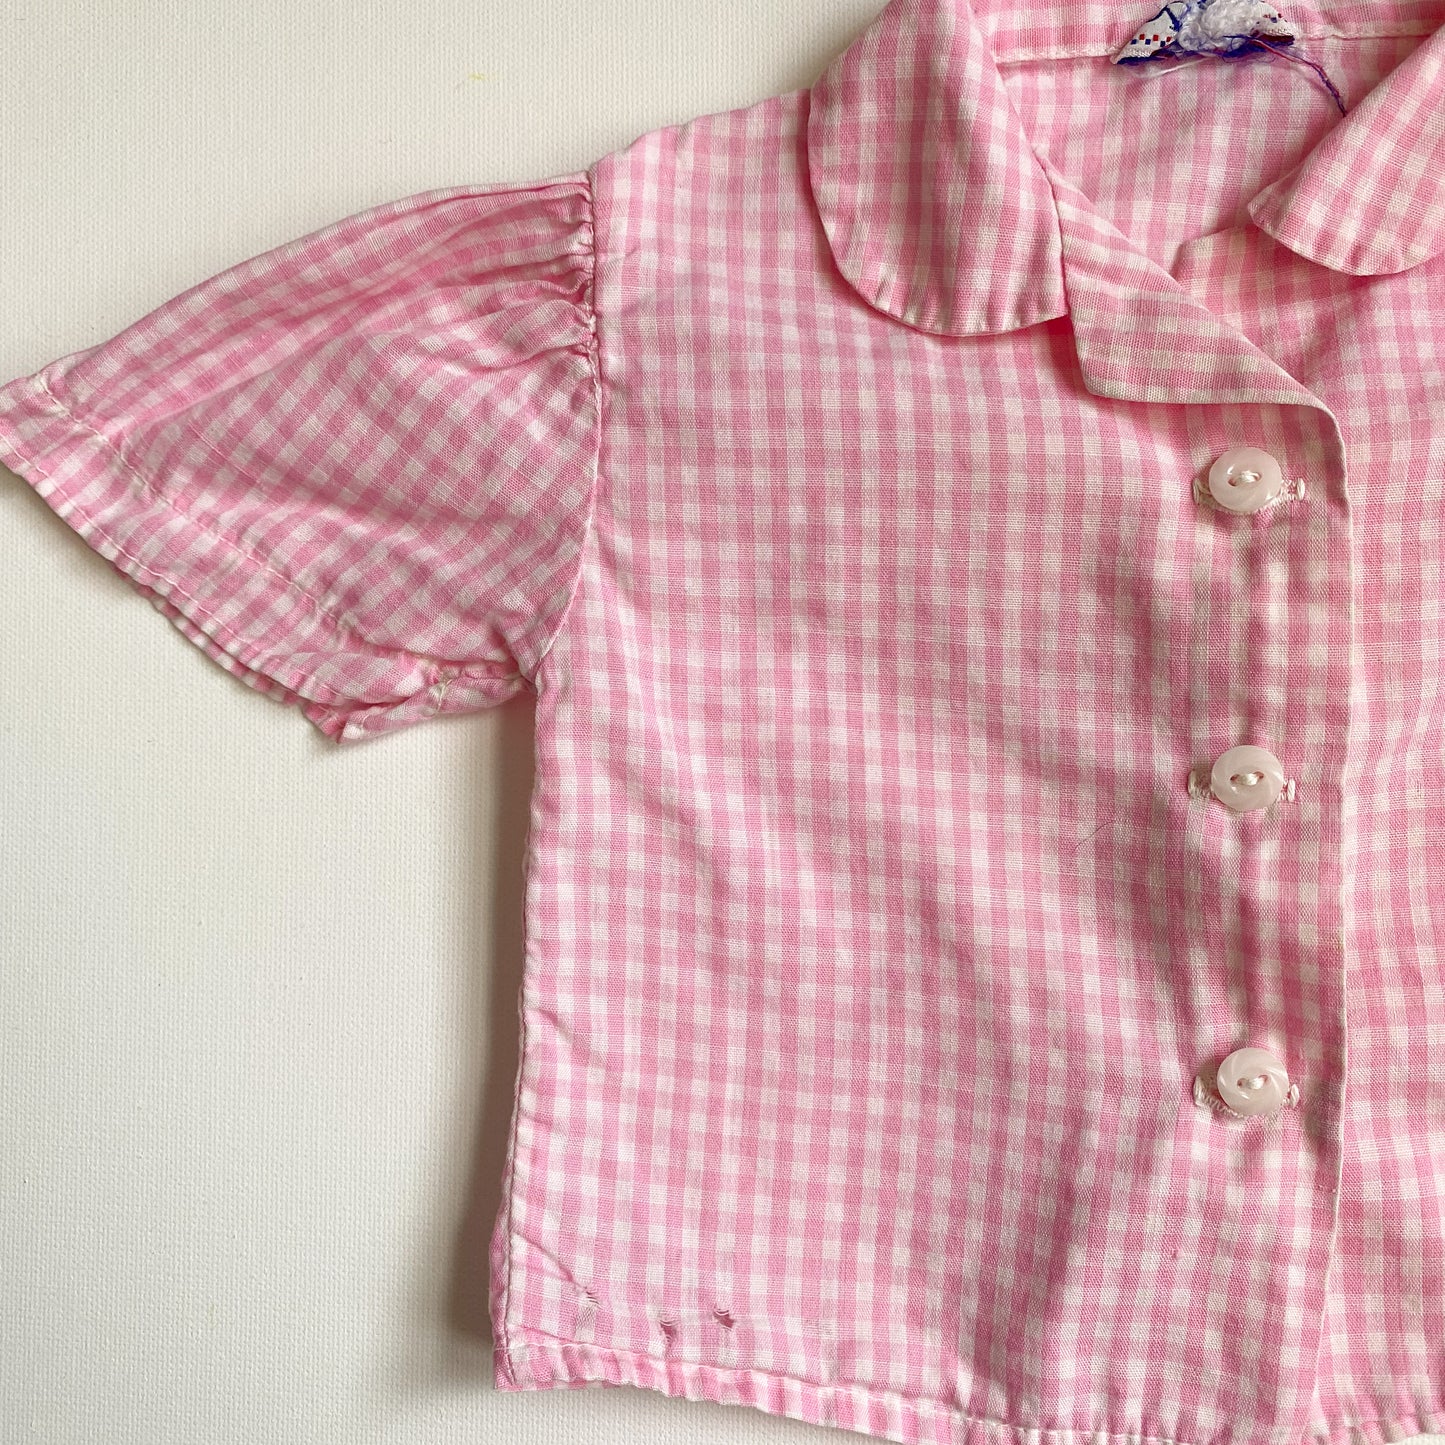 Vintage Pink Gingham Button Down 6-12M